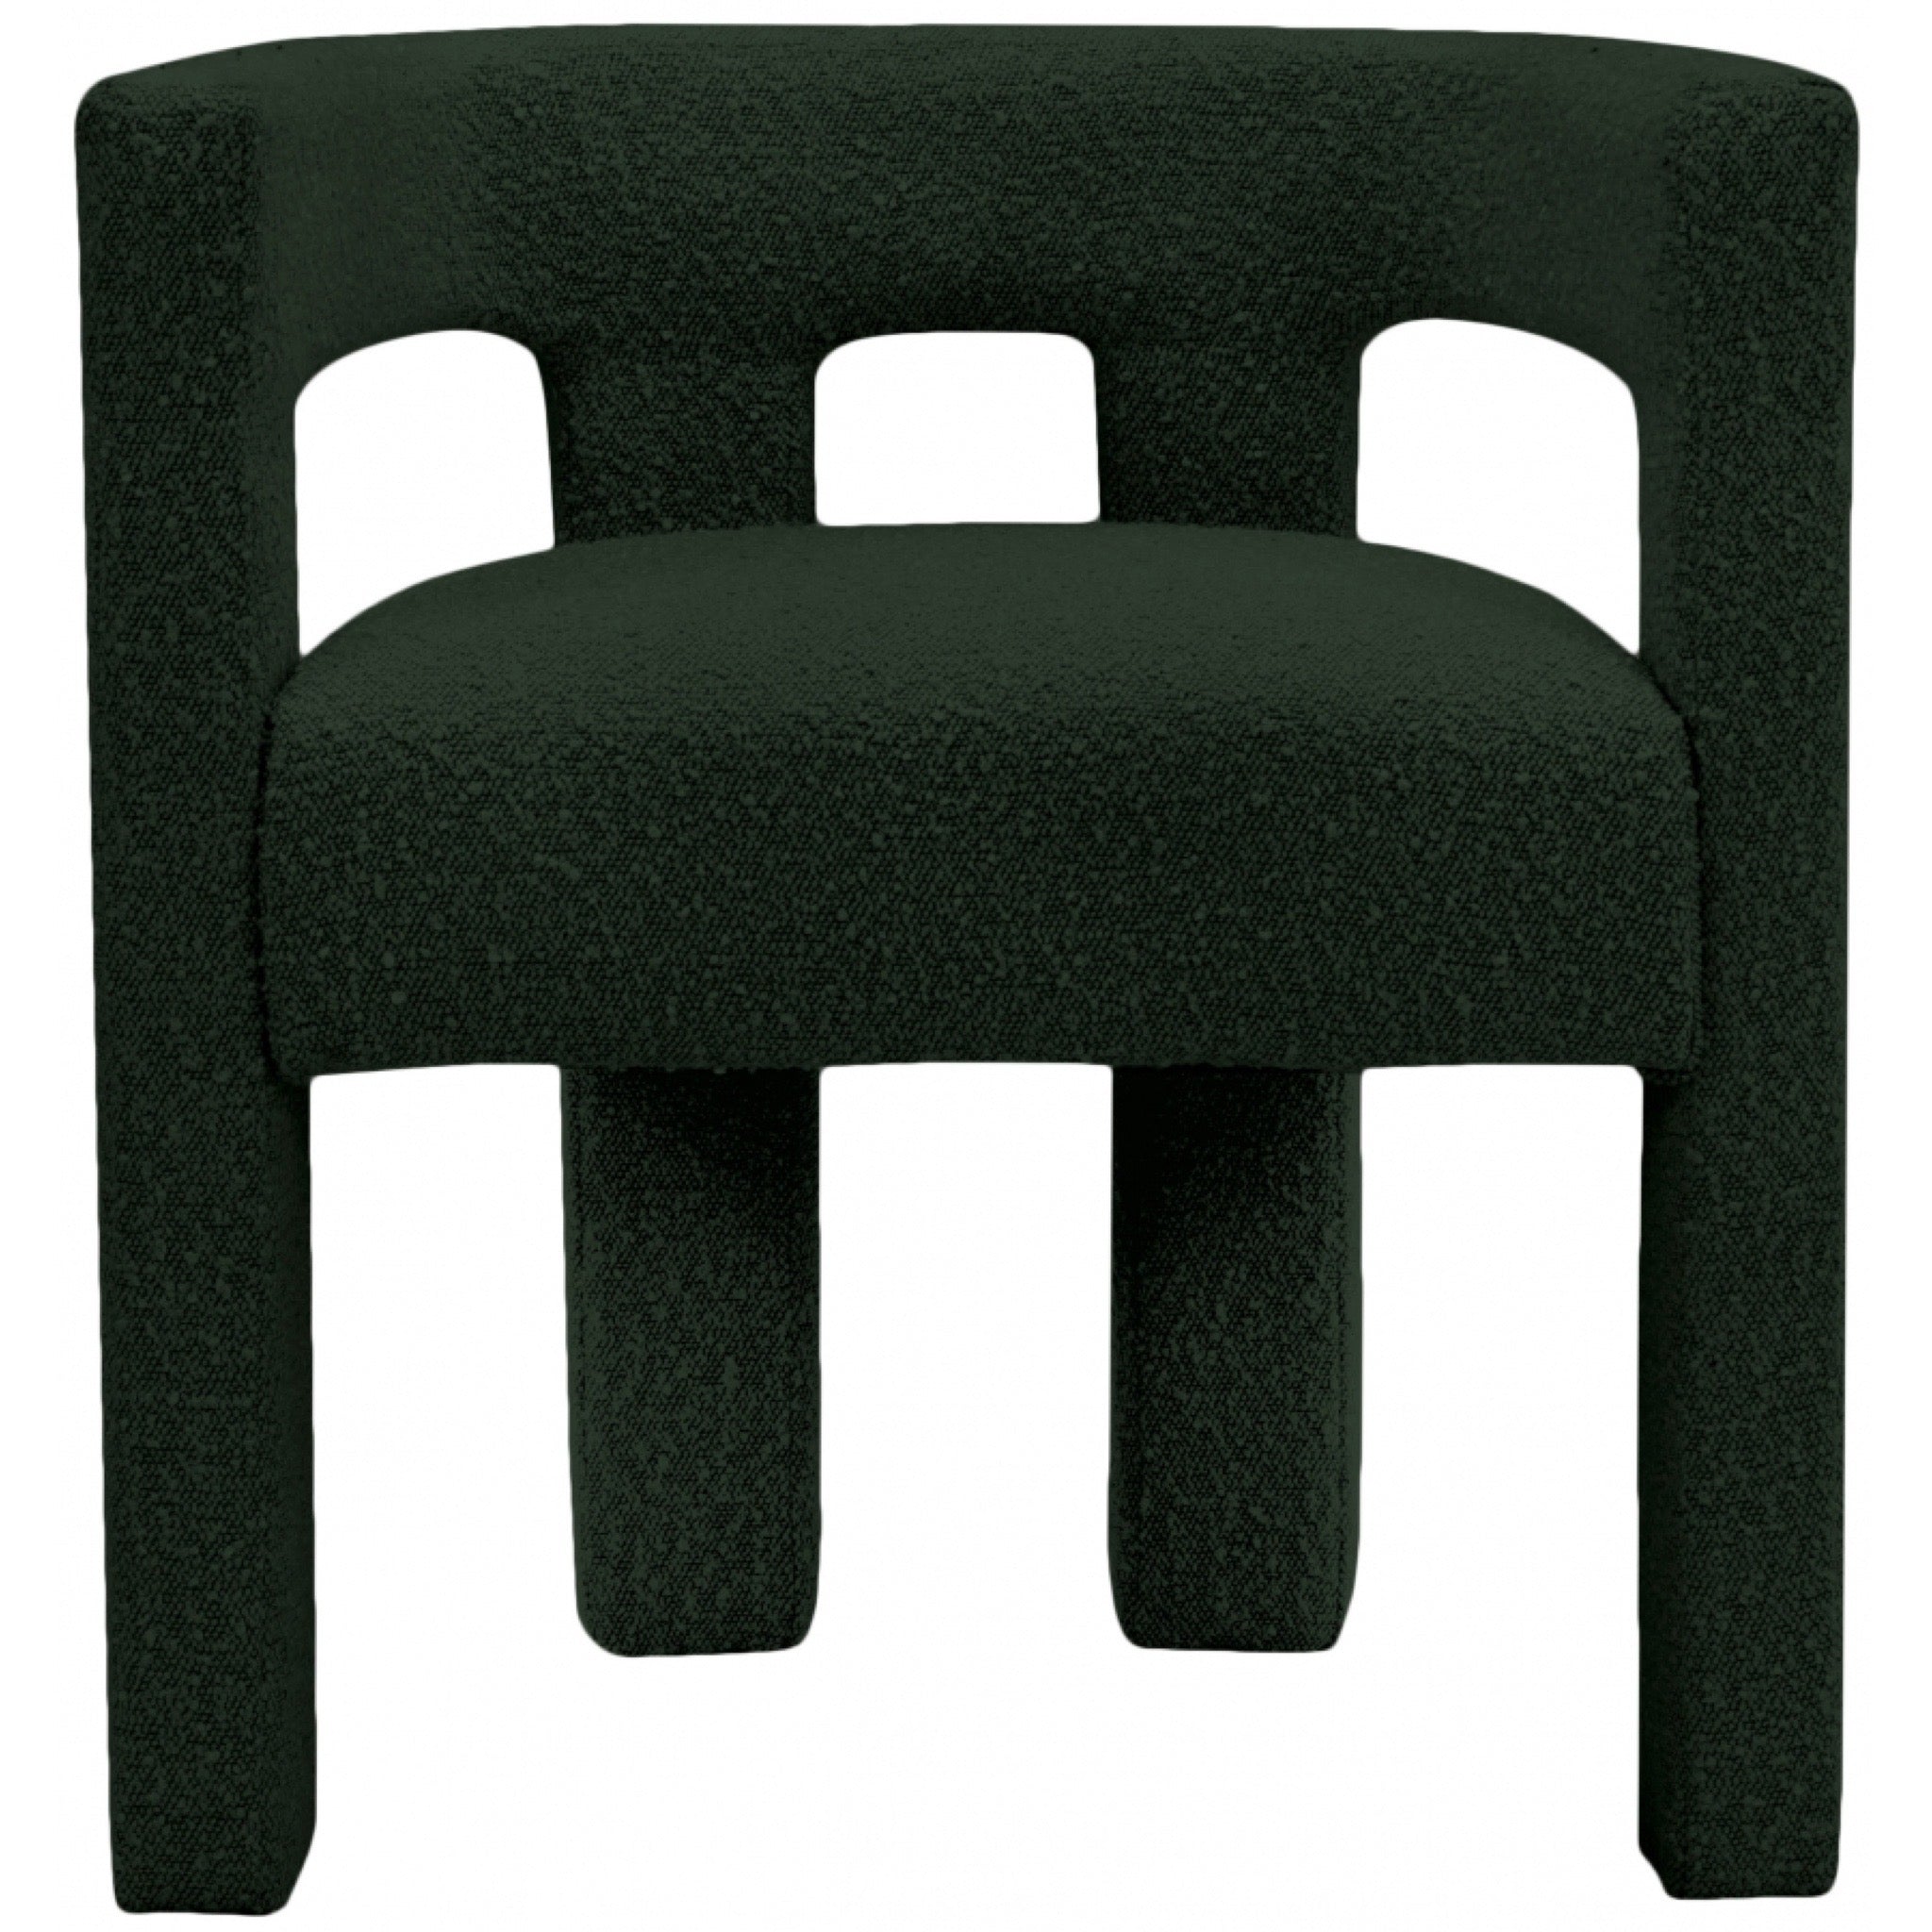 ATHENA BOUCLE FABRIC CHAIR - GREEN